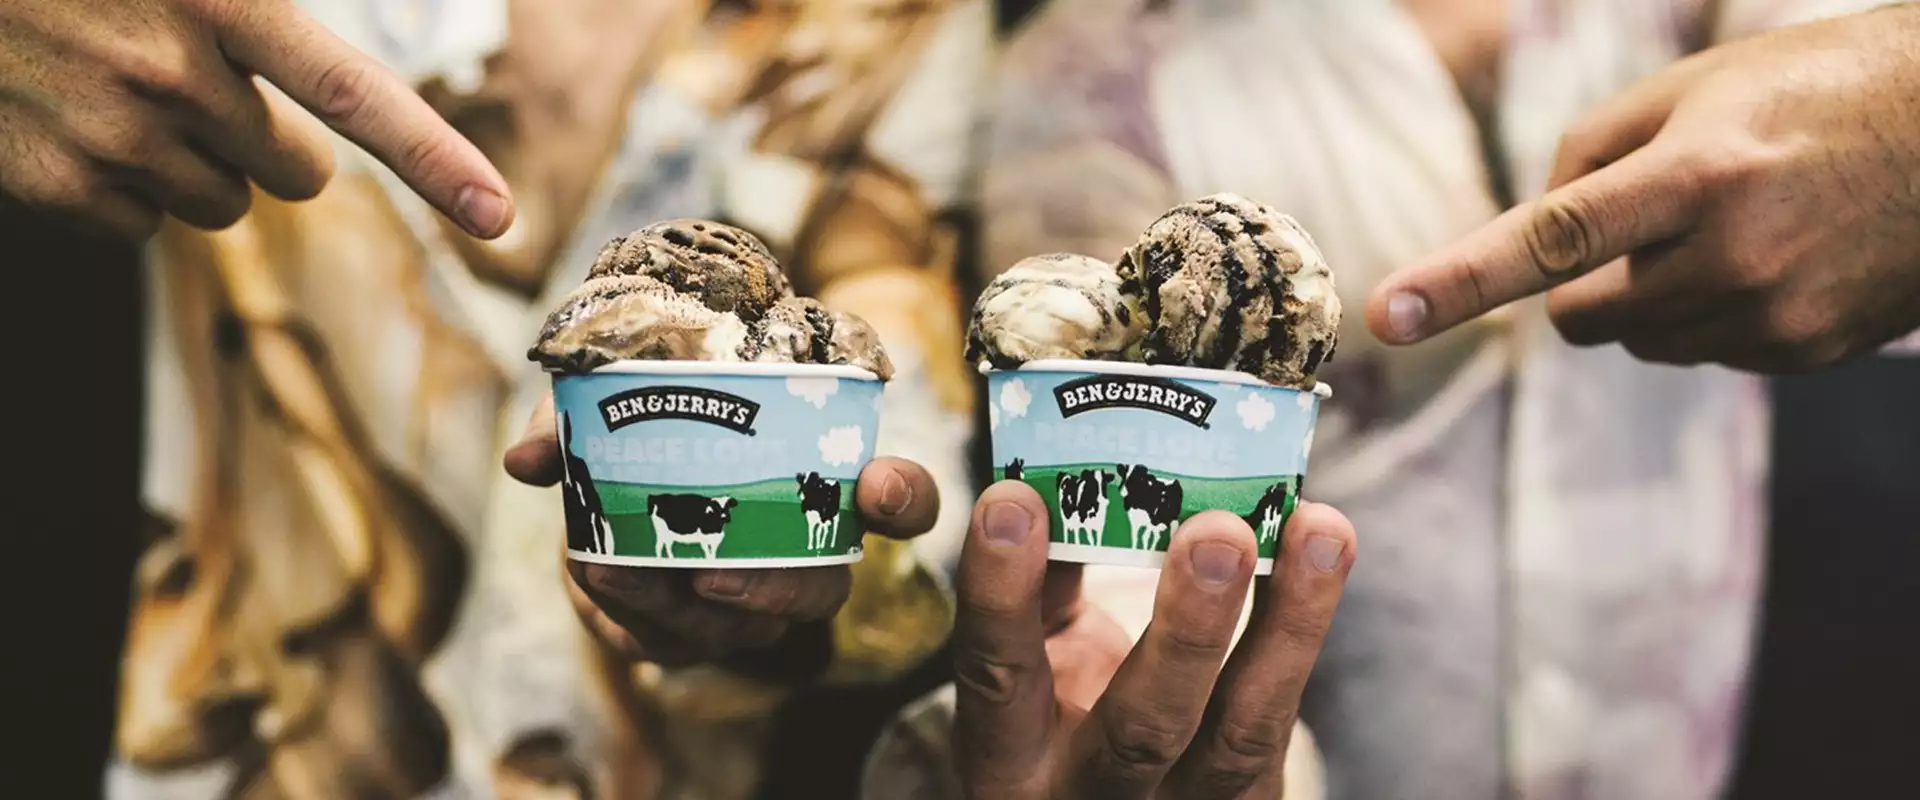 Why sustainability should be central to 21st century business strategy - SNL_TWCP_BenJerrys-banner